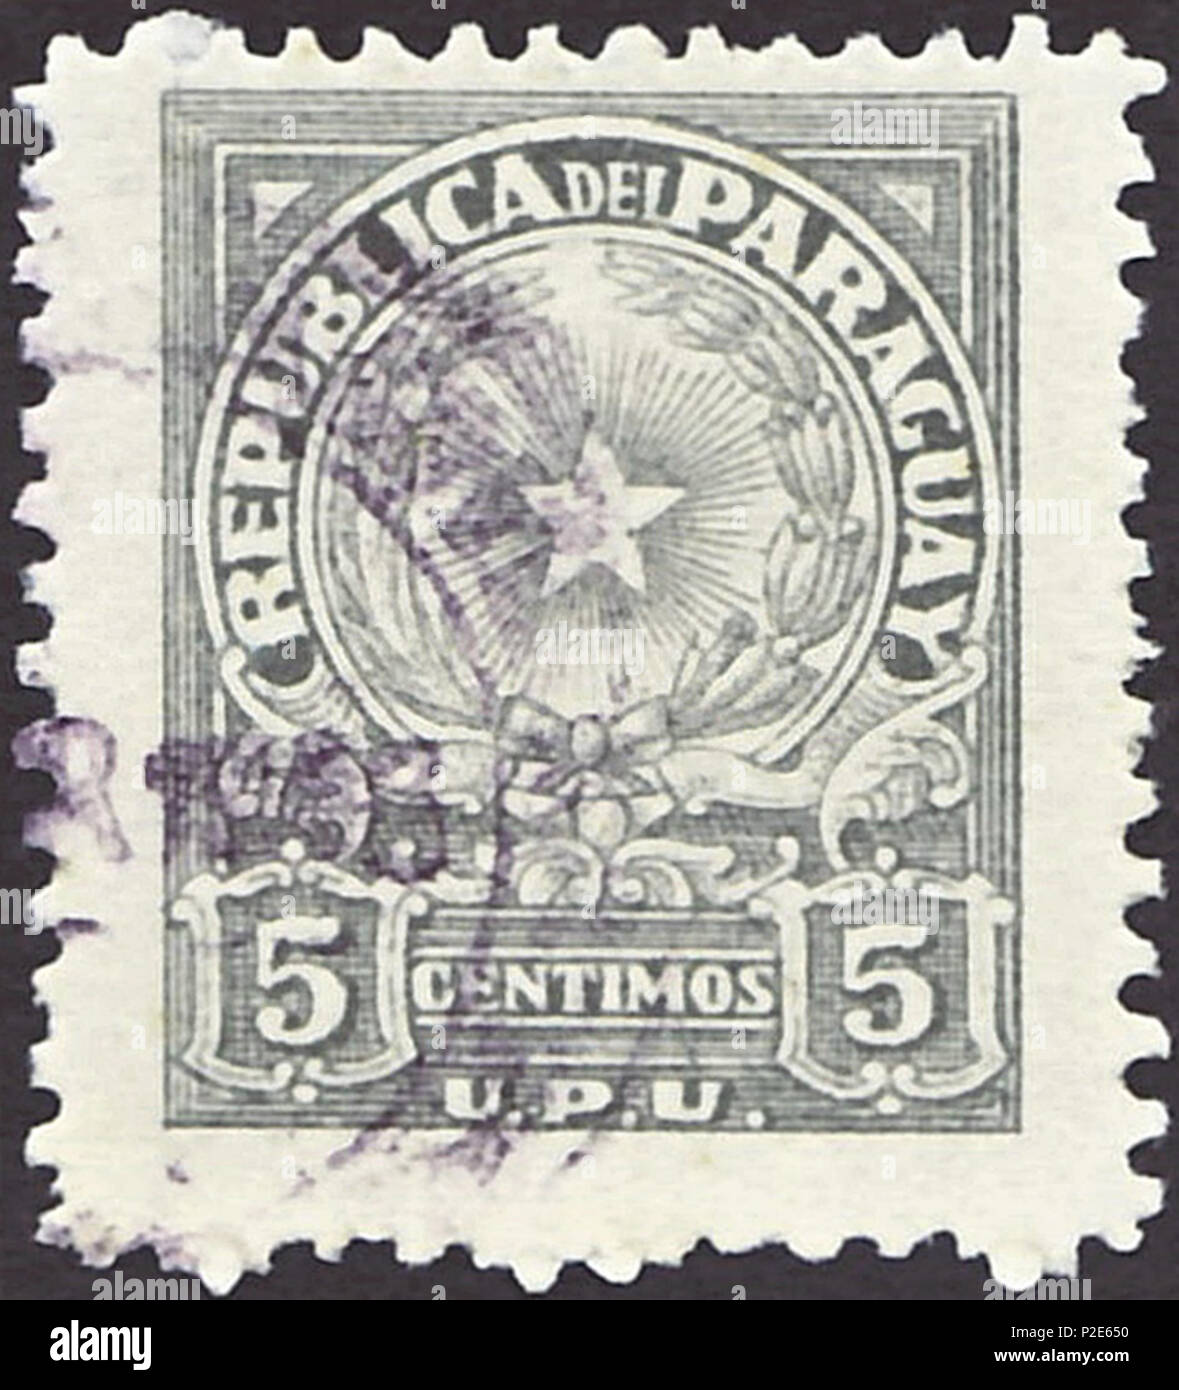 . Stamp of Paraguay; 1946; definitive stamps in the drawing 'Star in coat of arms' with U.P.U. inscribed below; postmarked Stamp: Michel: No. 596 Color: grey Watermark: none Nominal value: 5 Centimos Stamp picture size: 19.5 x 24.0 mm . 1946 (first issue of the stamp). Correo Paraguayo (Post of Paraguay) 39 PAR 1946 MiNr0596 pm B002 Stock Photo